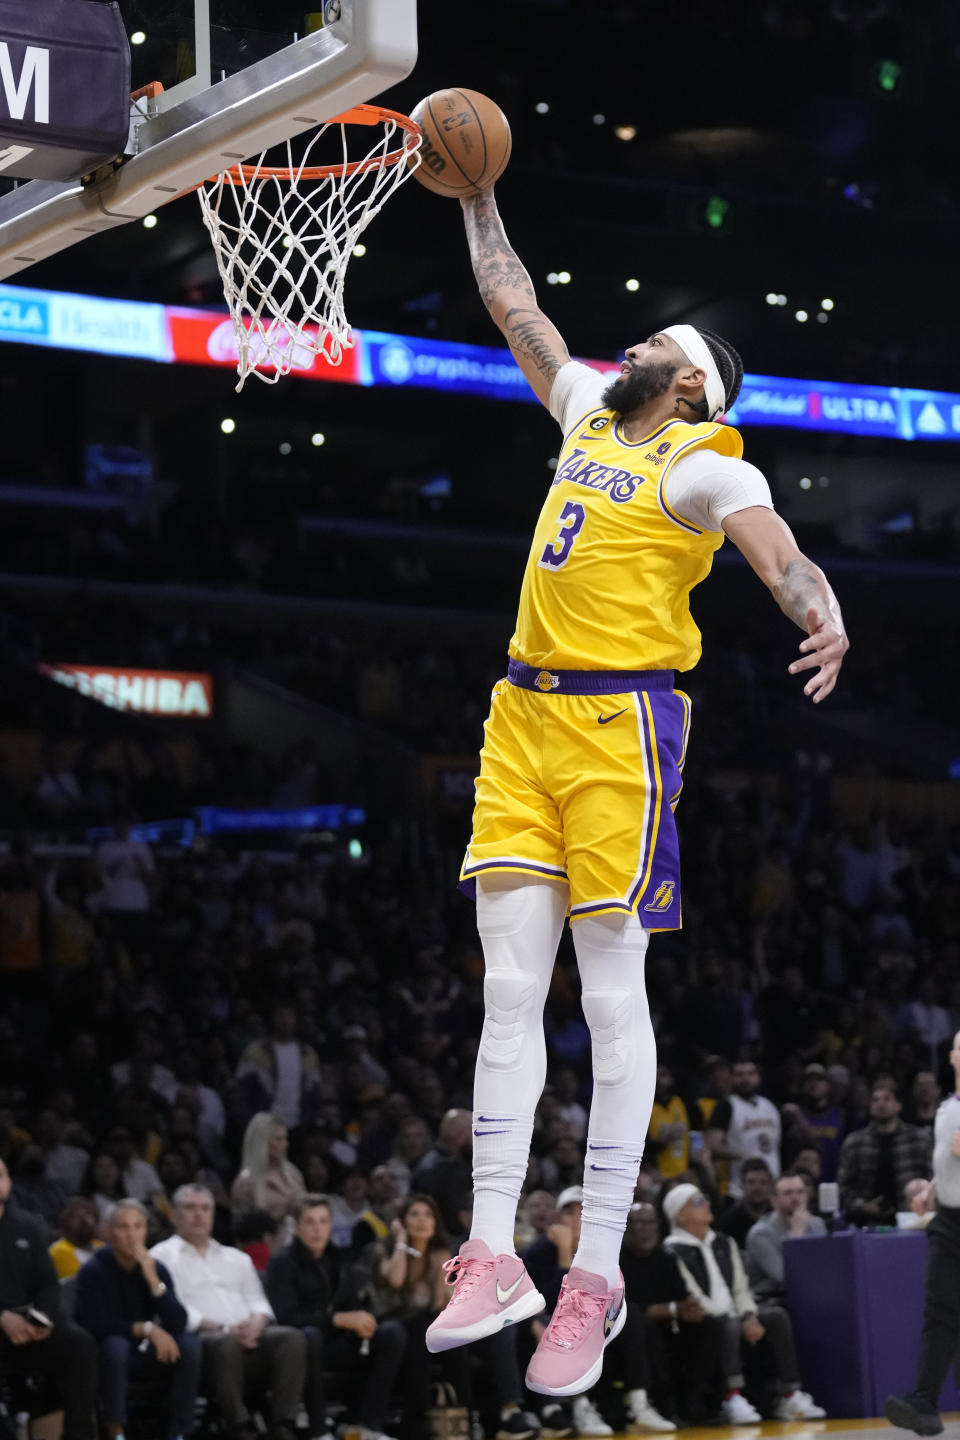 Los Angeles Lakers forward Anthony Davis scores on a breakaway dunk during the first half of an NBA basketball play-in tournament game against the Minnesota Timberwolves Tuesday, April 11, 2023, in Los Angeles. (AP Photo/Marcio Jose Sanchez)